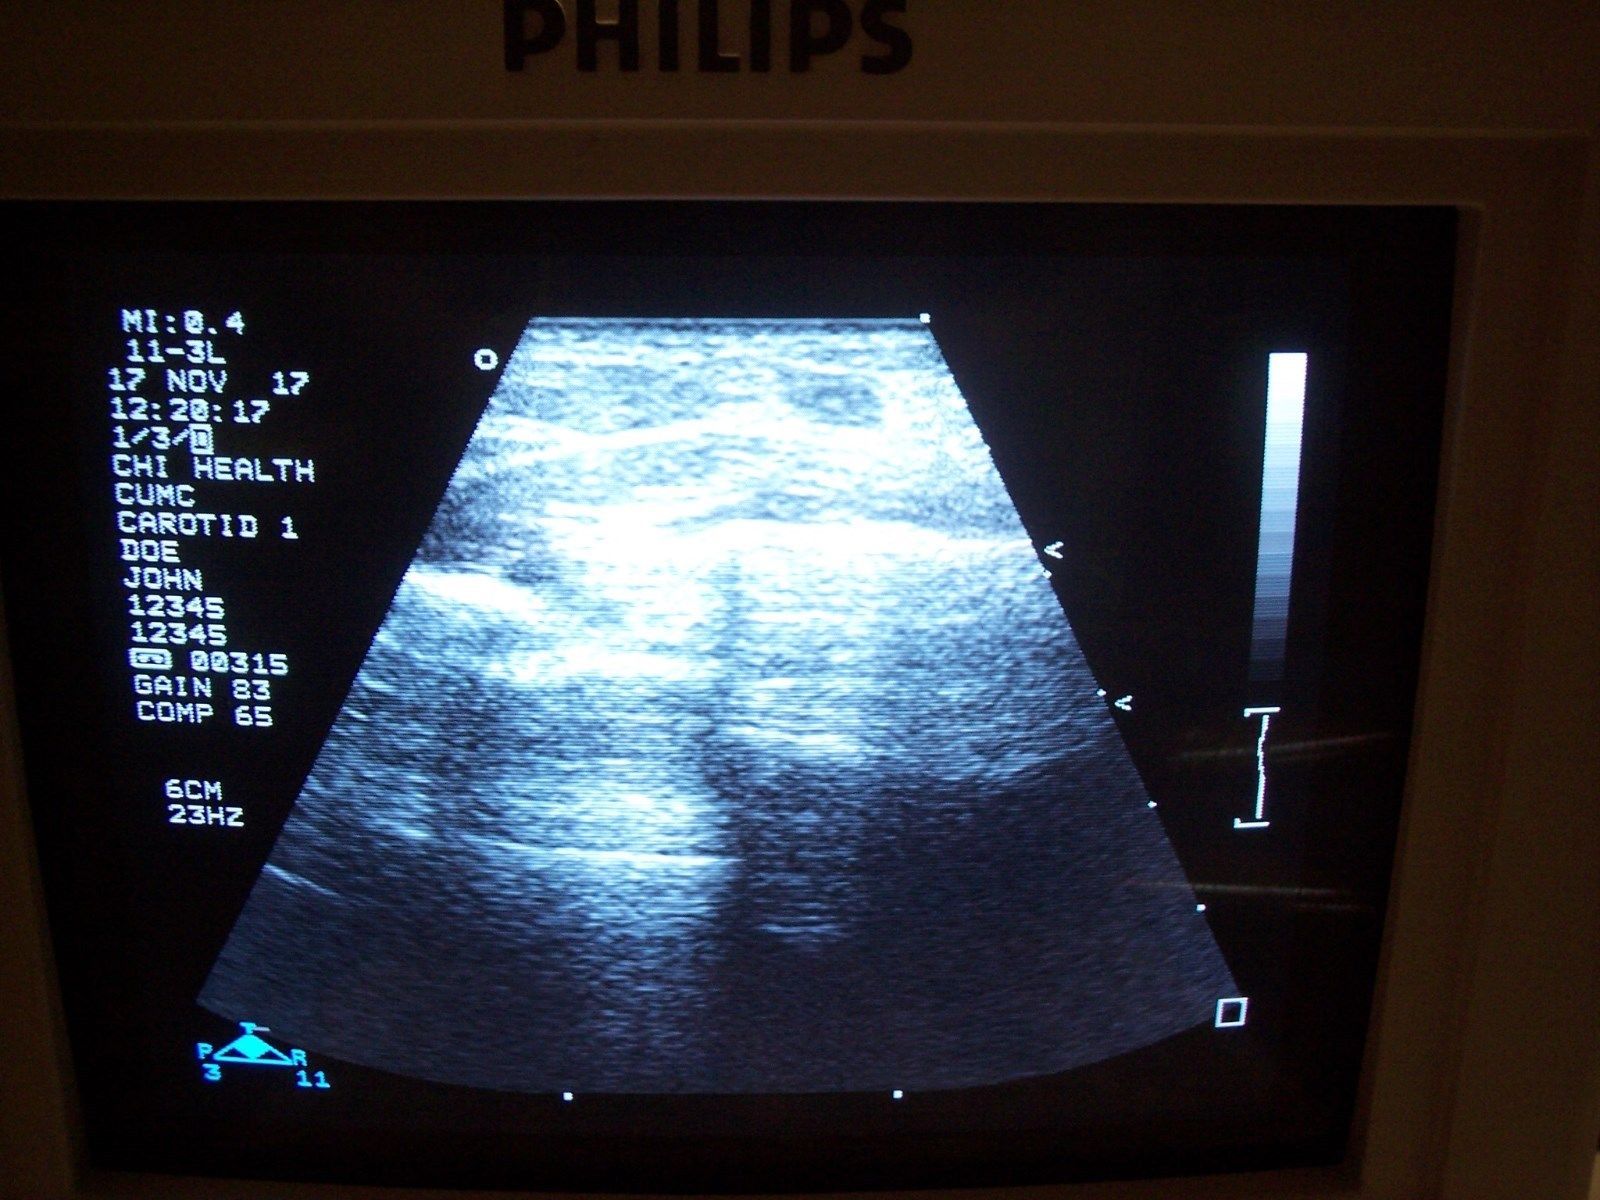 Philips Sonos 5500 M2424A Ultrasound with Probes